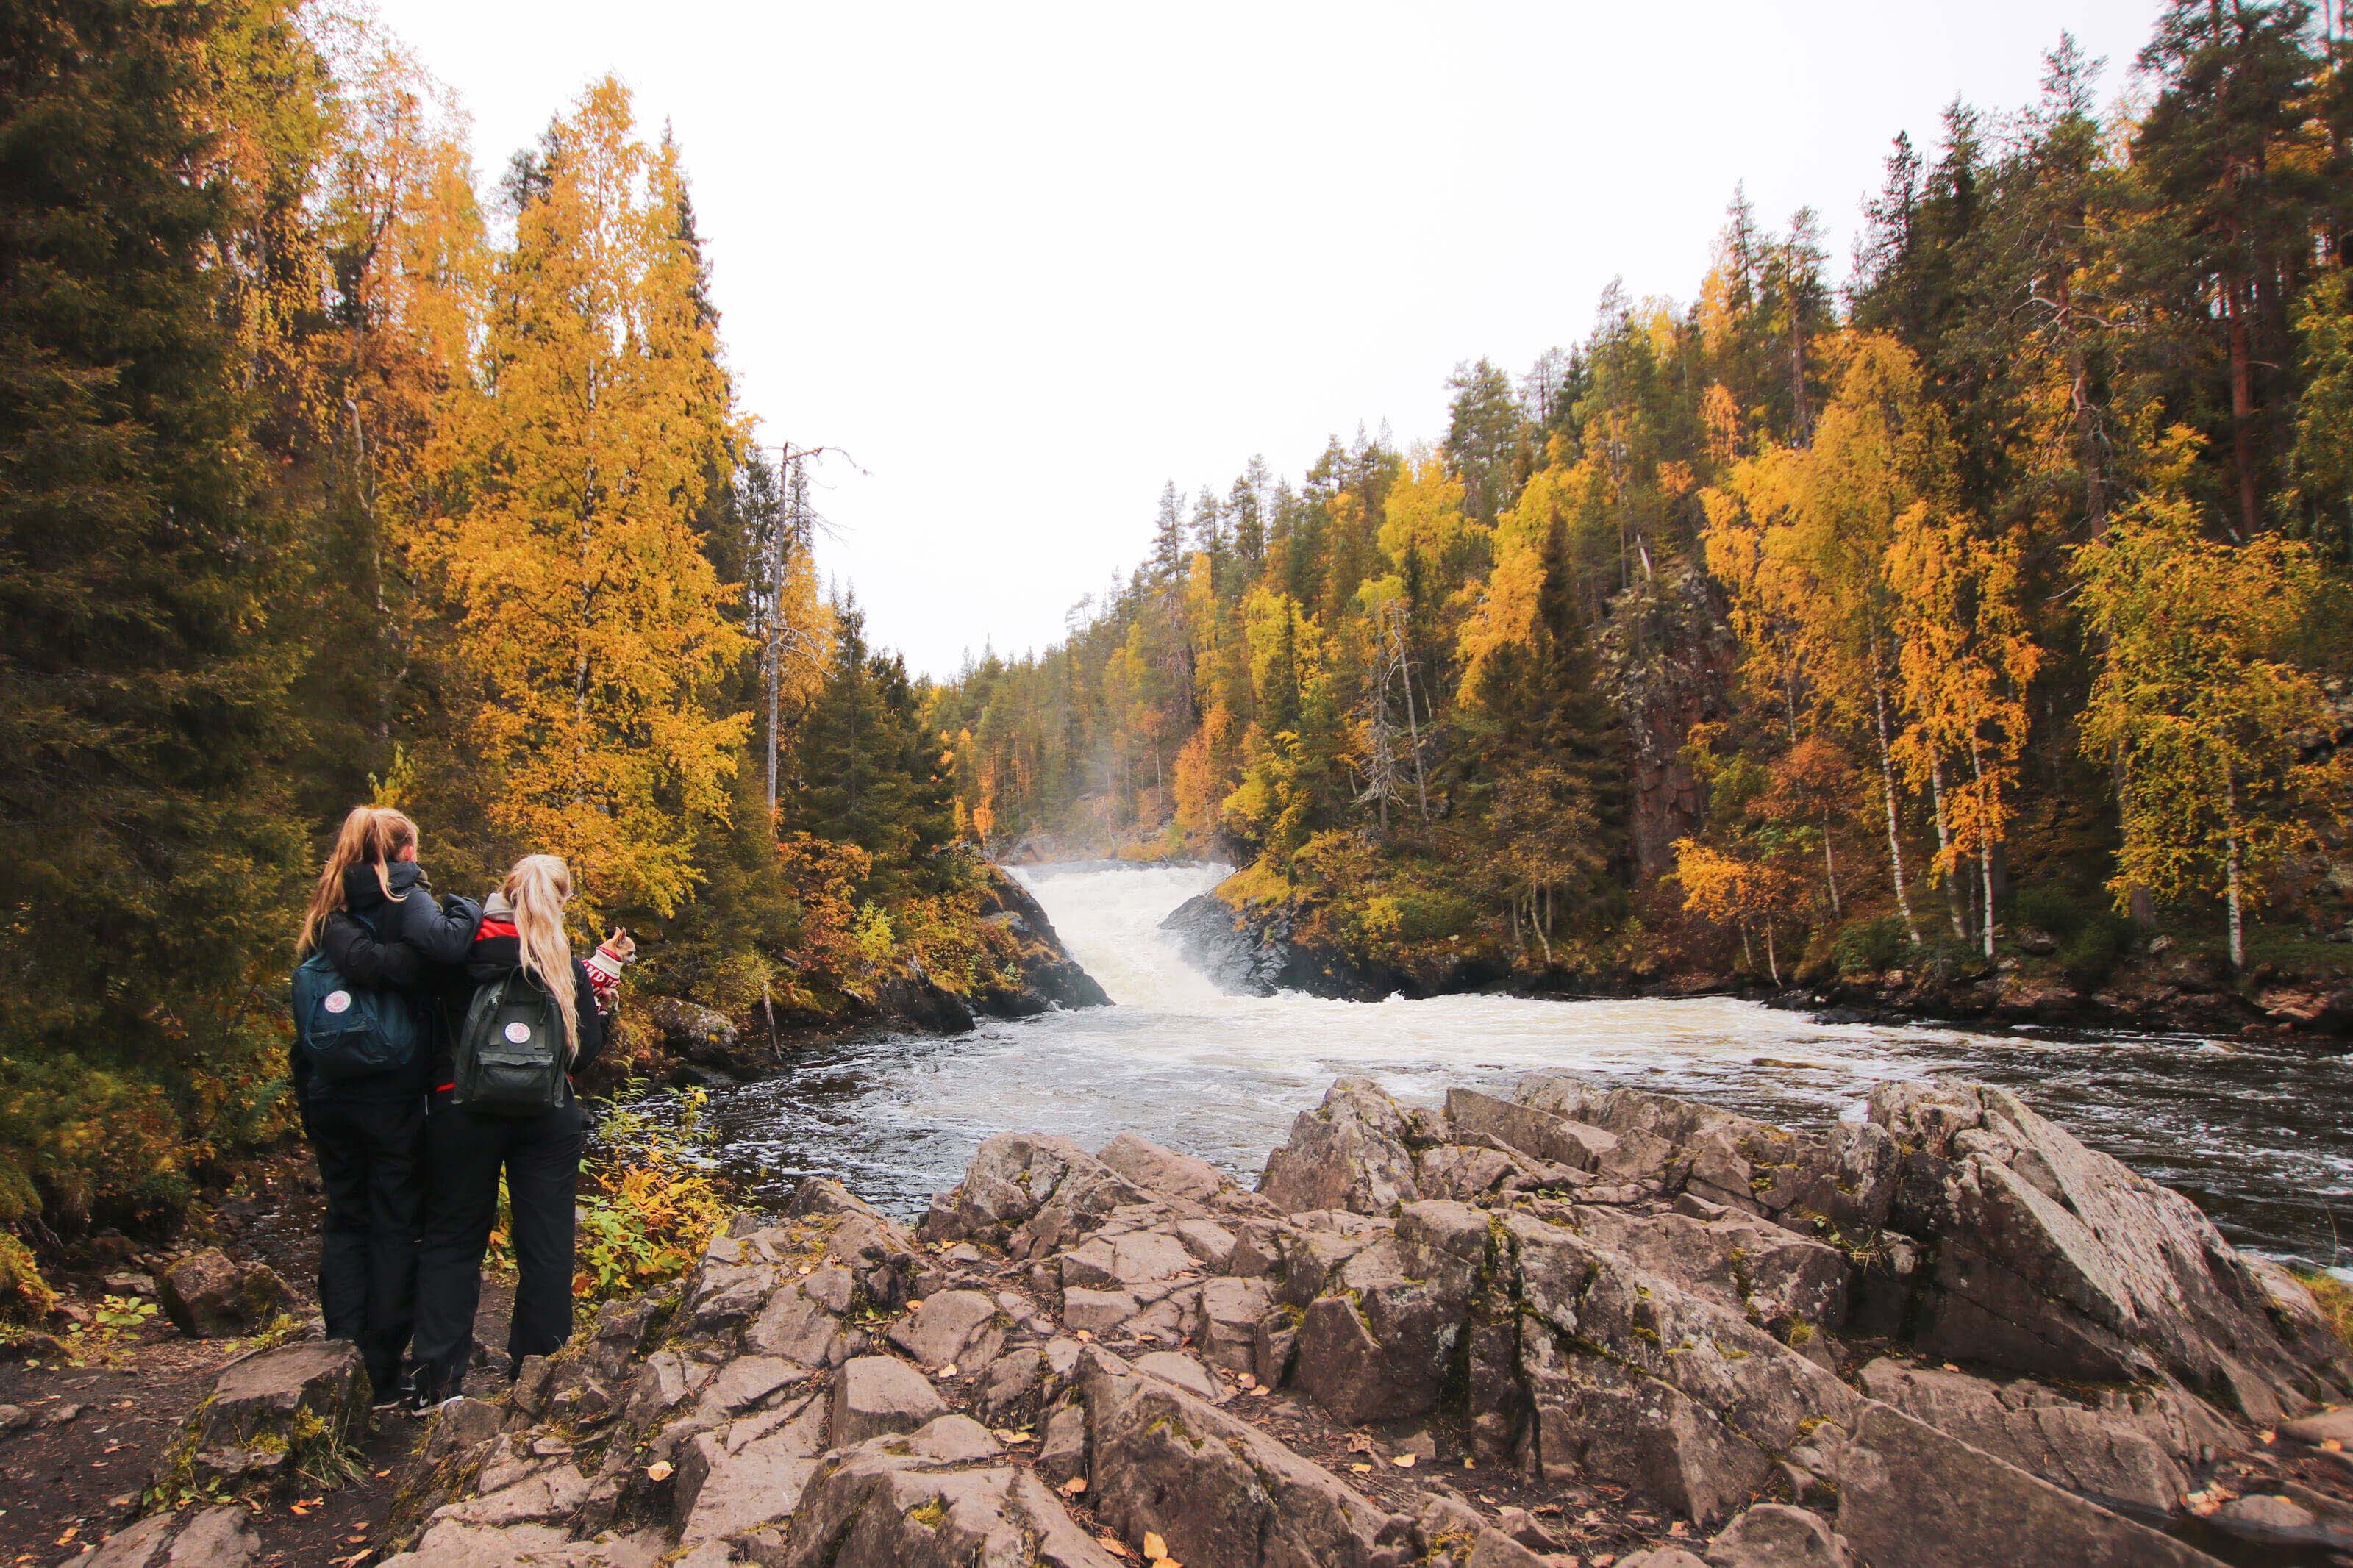 Two people and a dog hiking during the autumn foliage in Kuusamo, Finland.